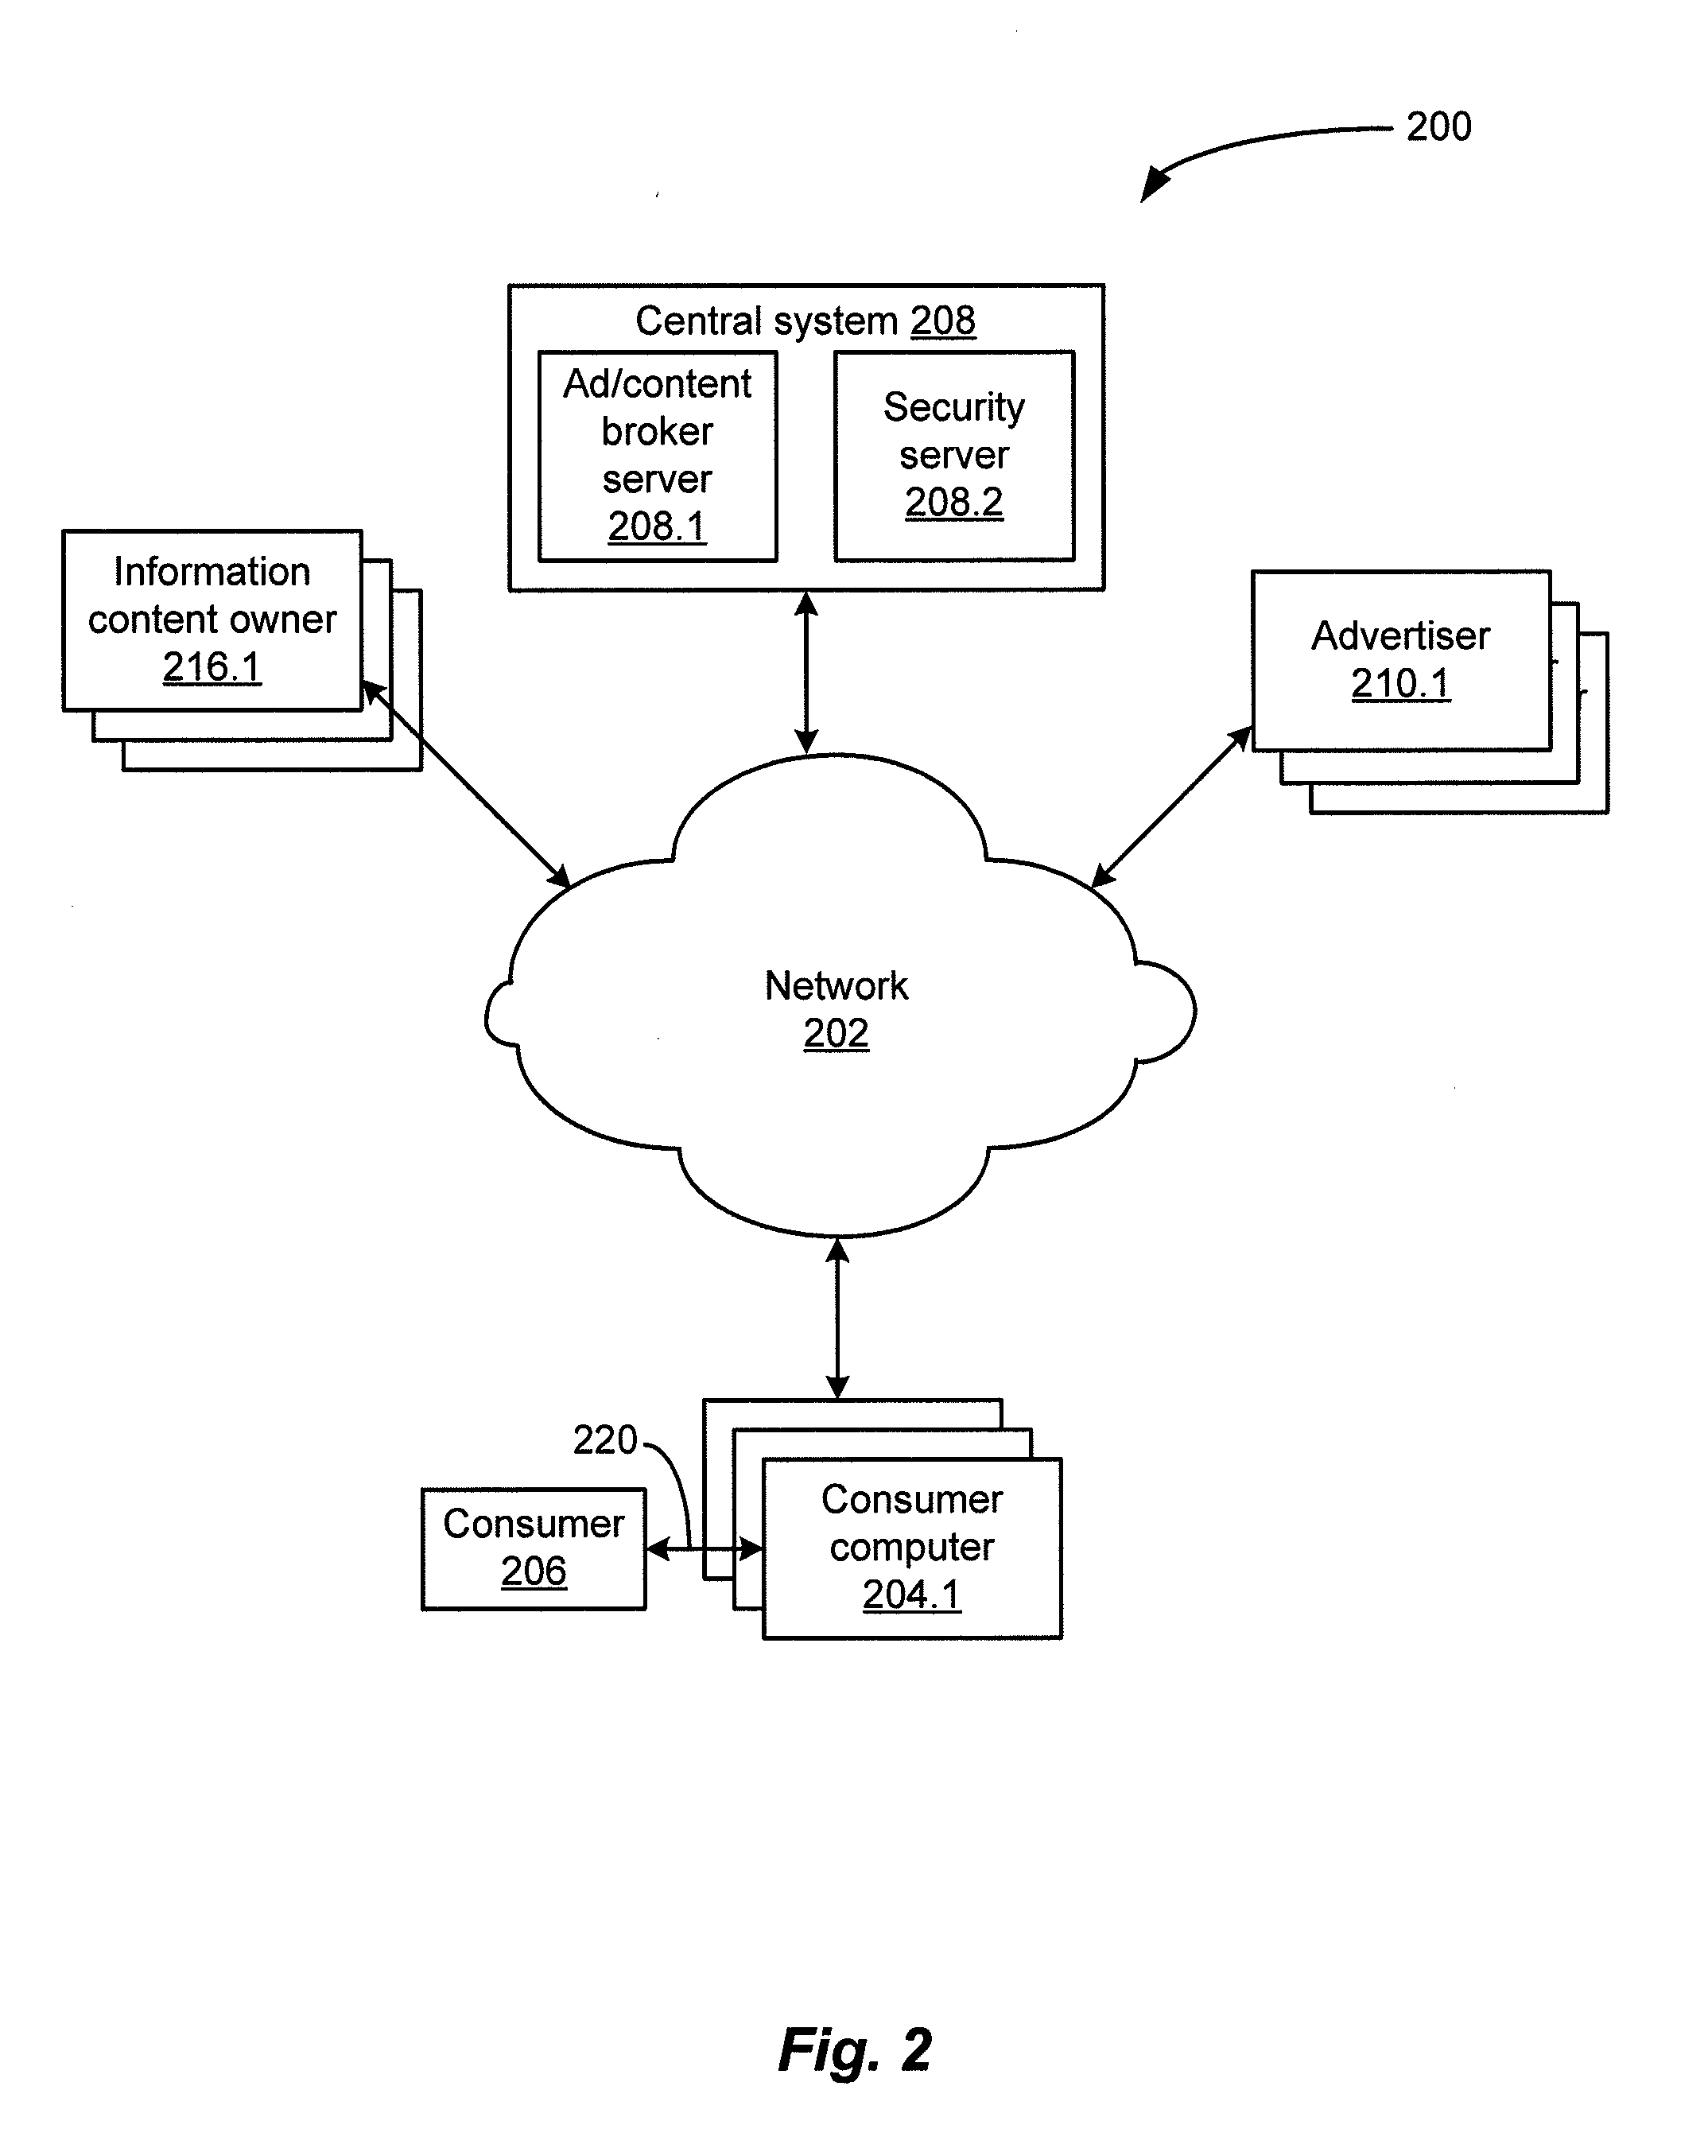 Method and system for processing on-line transactions involving a content owner, an advertiser, and a targeted consumer